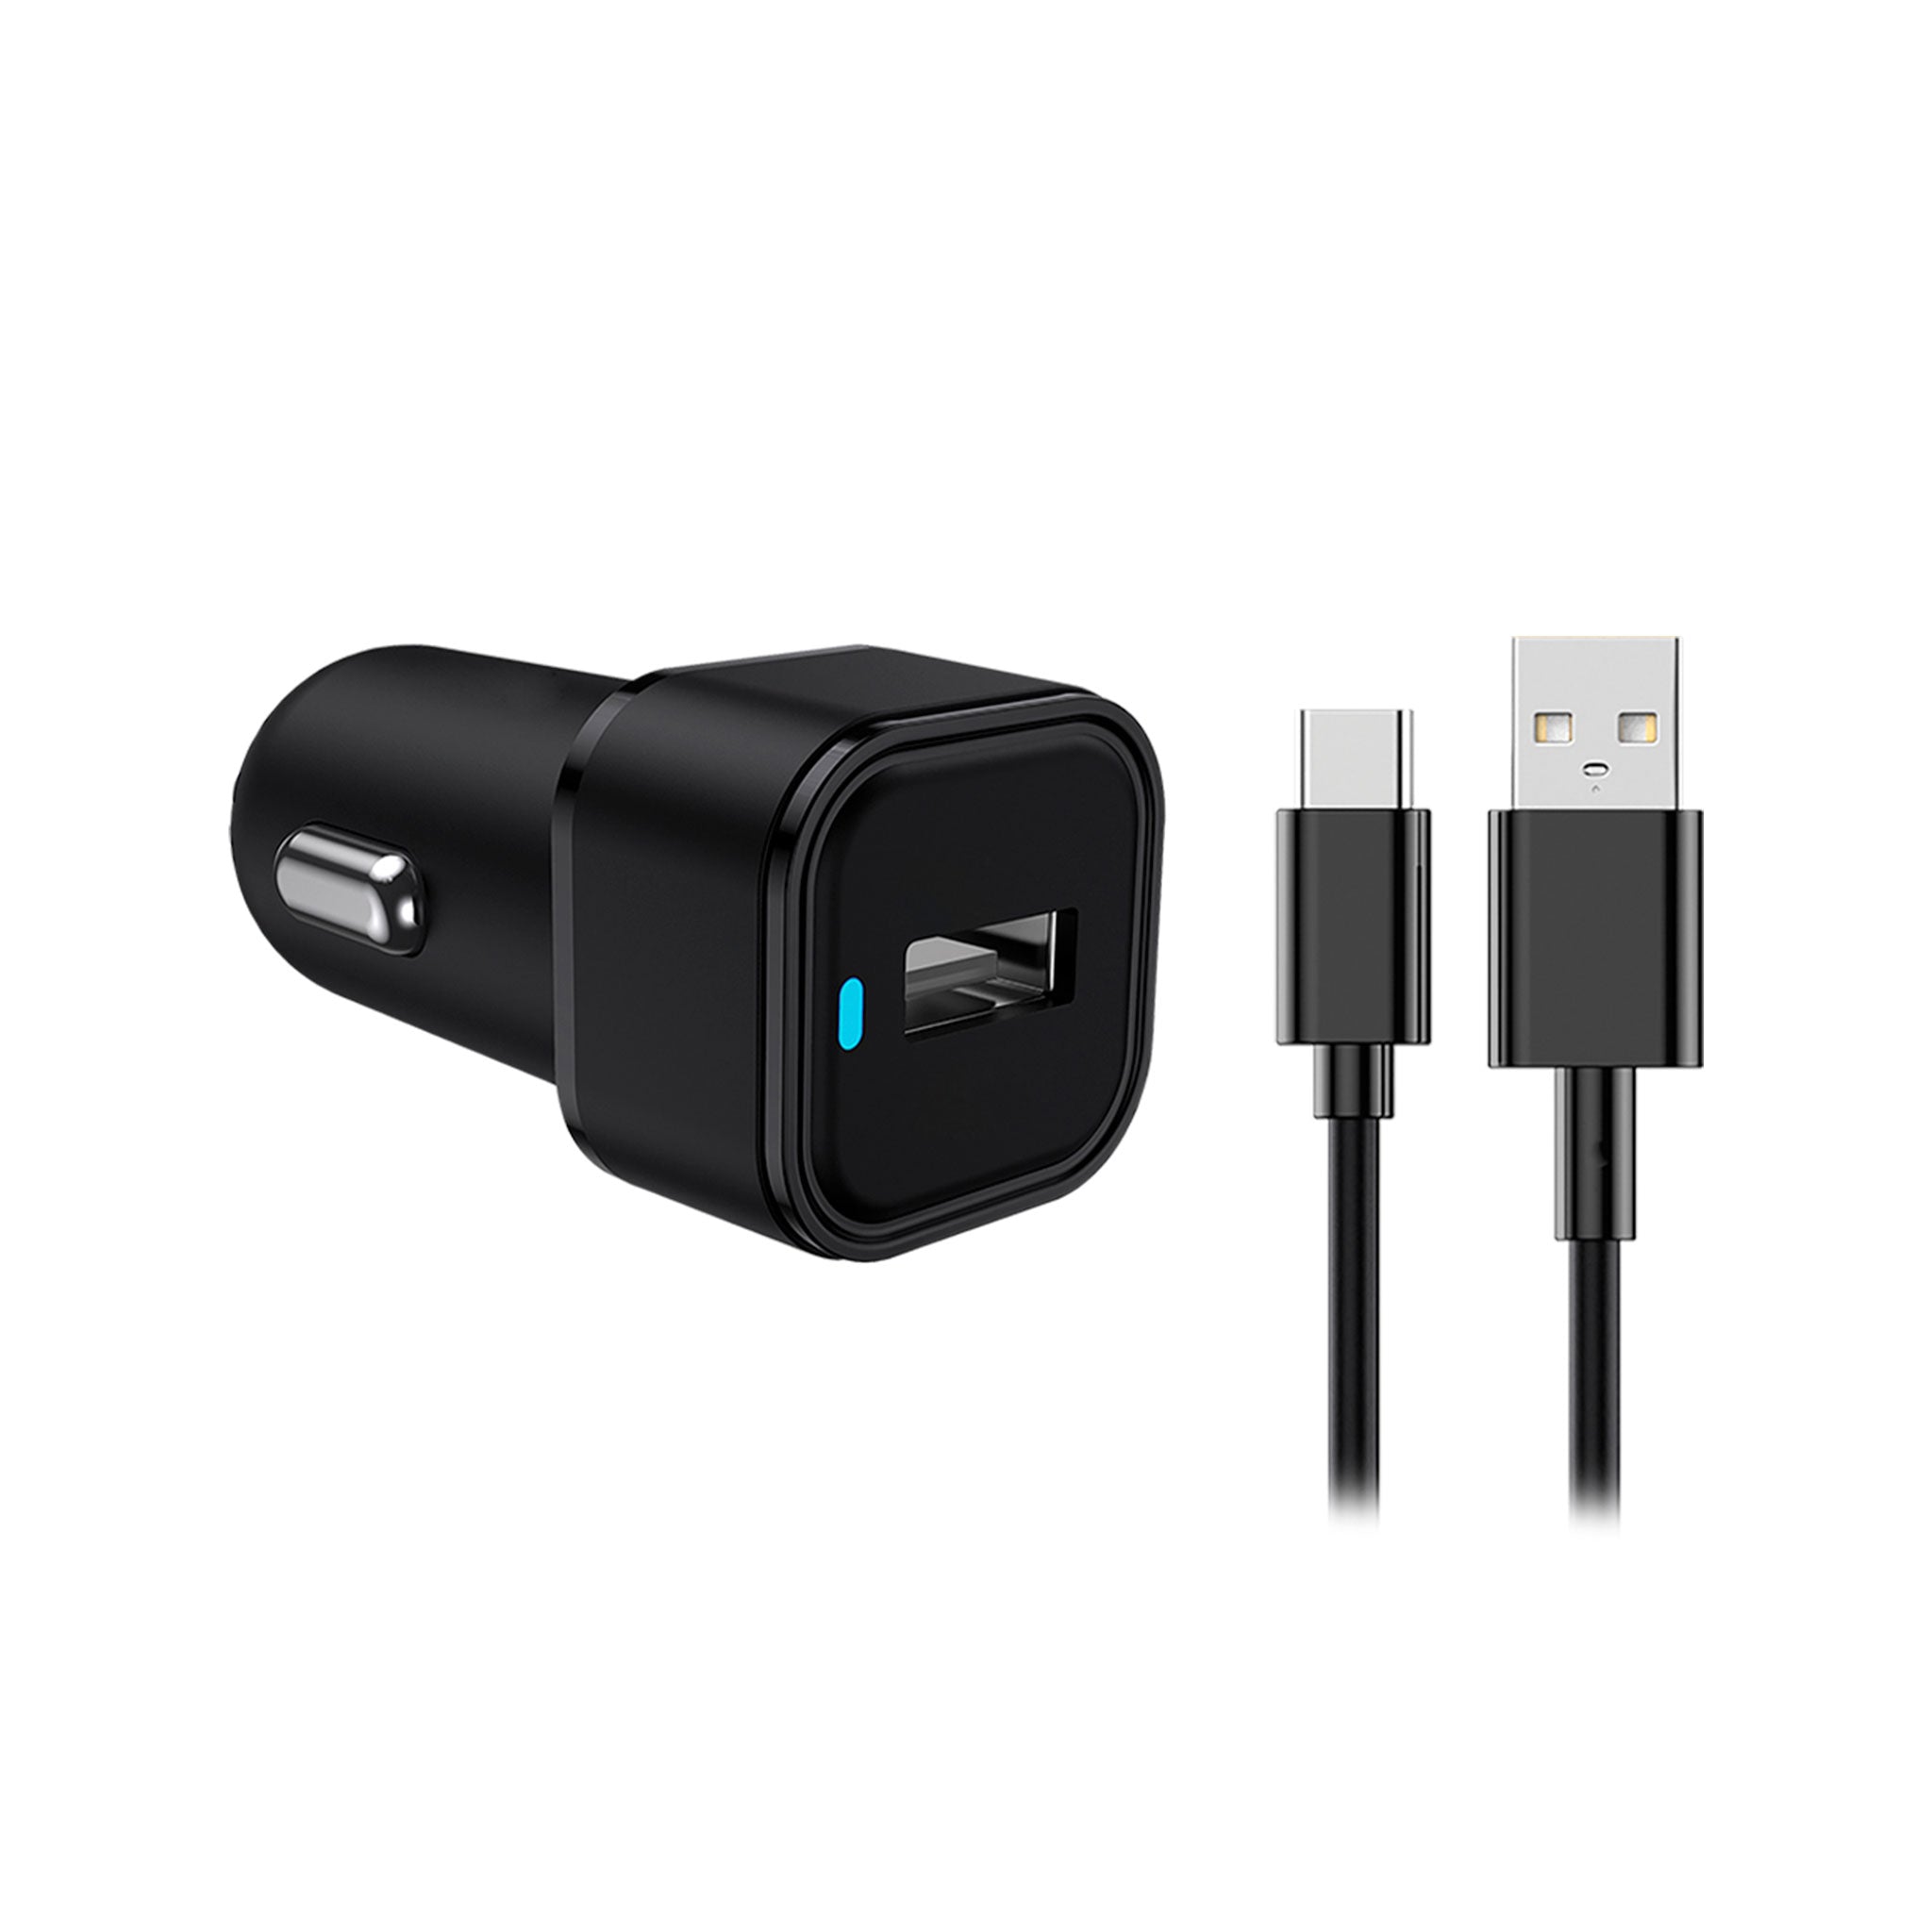 Qmadix - Usb A Car Charger 18w And Usb A To Usb C Cable 4ft - Black